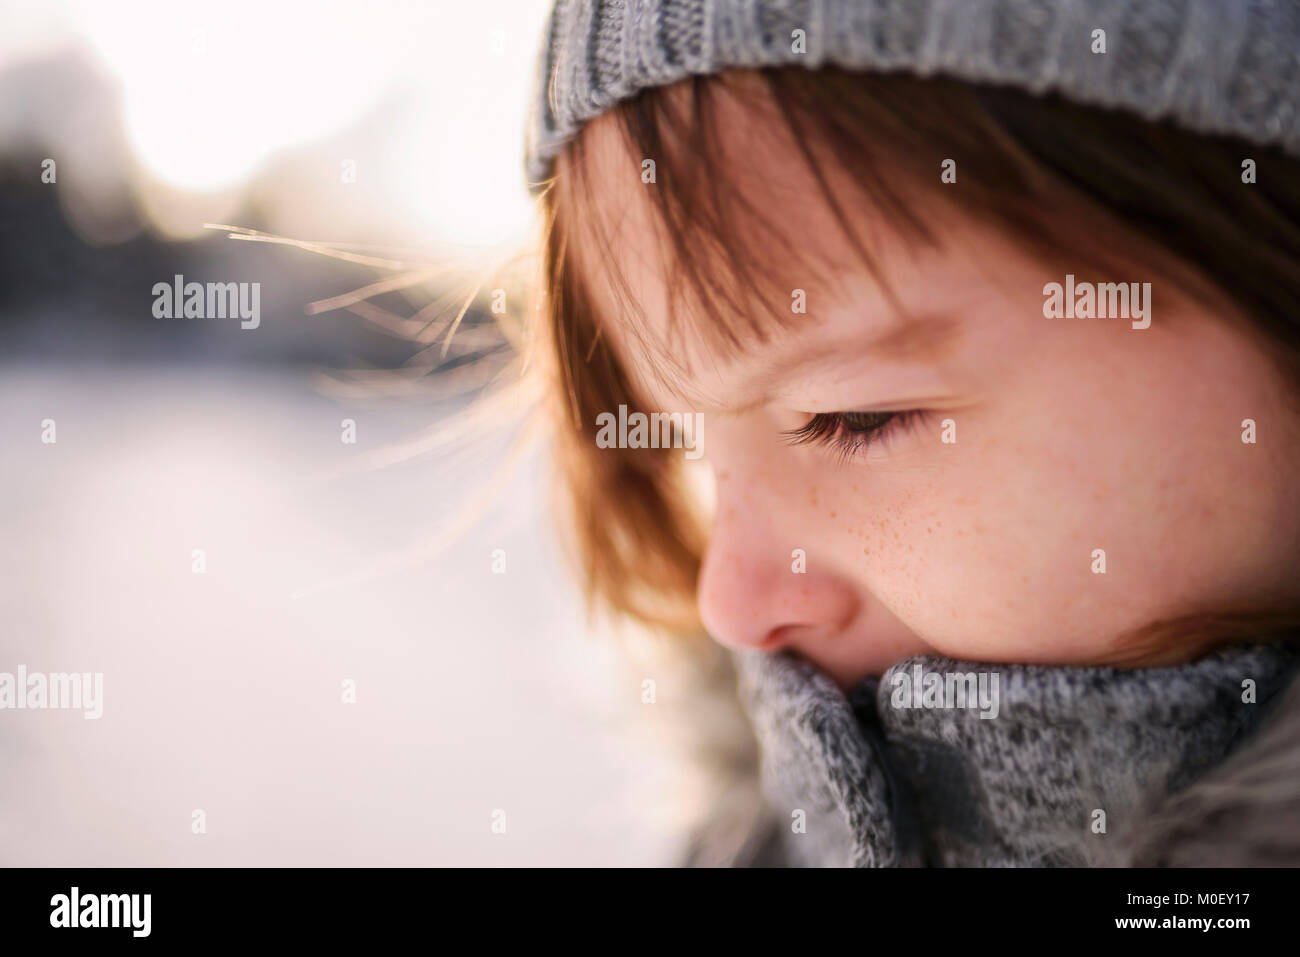 Close-up portrait of a girl outside wearing warm clothing Stock Photo